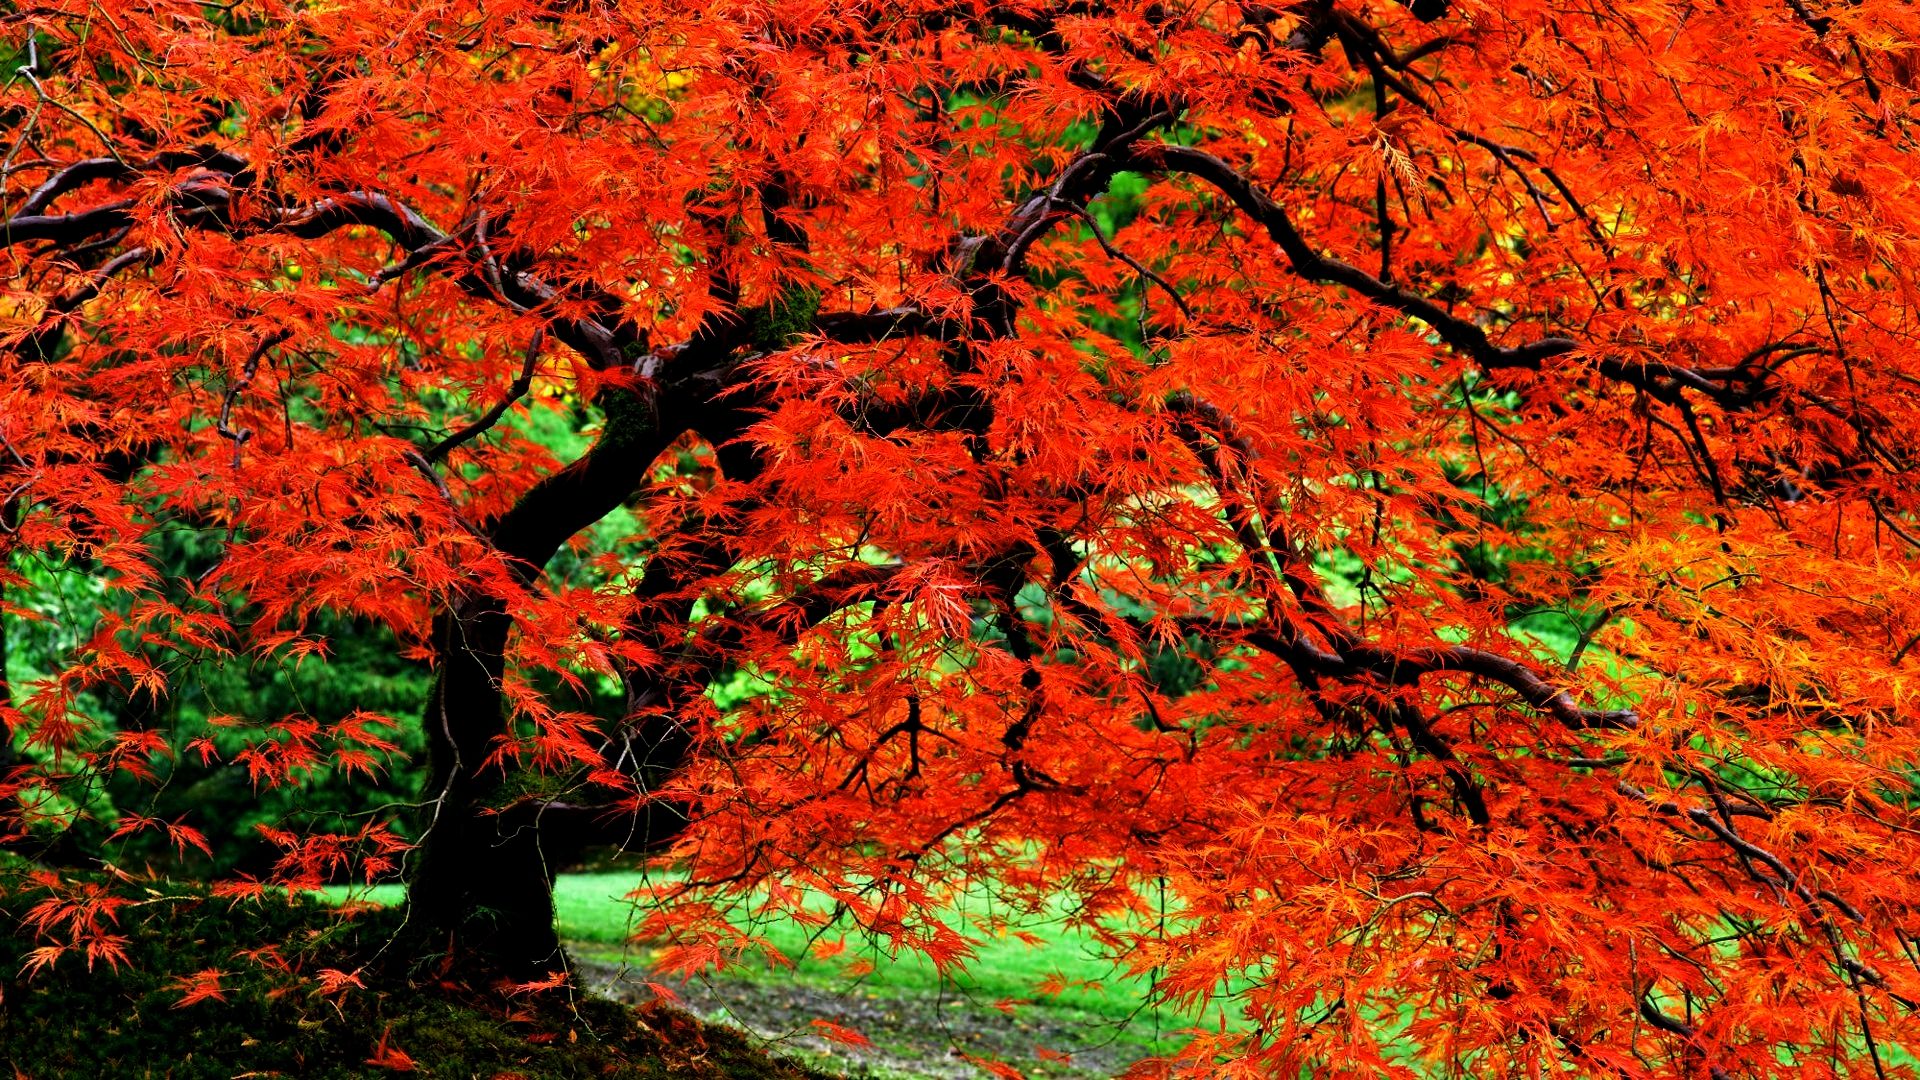 Free download Autumn Trees Wallpaper 40 Autumn Trees Photo and [1920x1080] for your Desktop, Mobile & Tablet. Explore Autumn Tree Wallpaper. Autumn Leaves Wallpaper, Fall Tree Wallpaper, Fall Trees Wallpaper Desktop